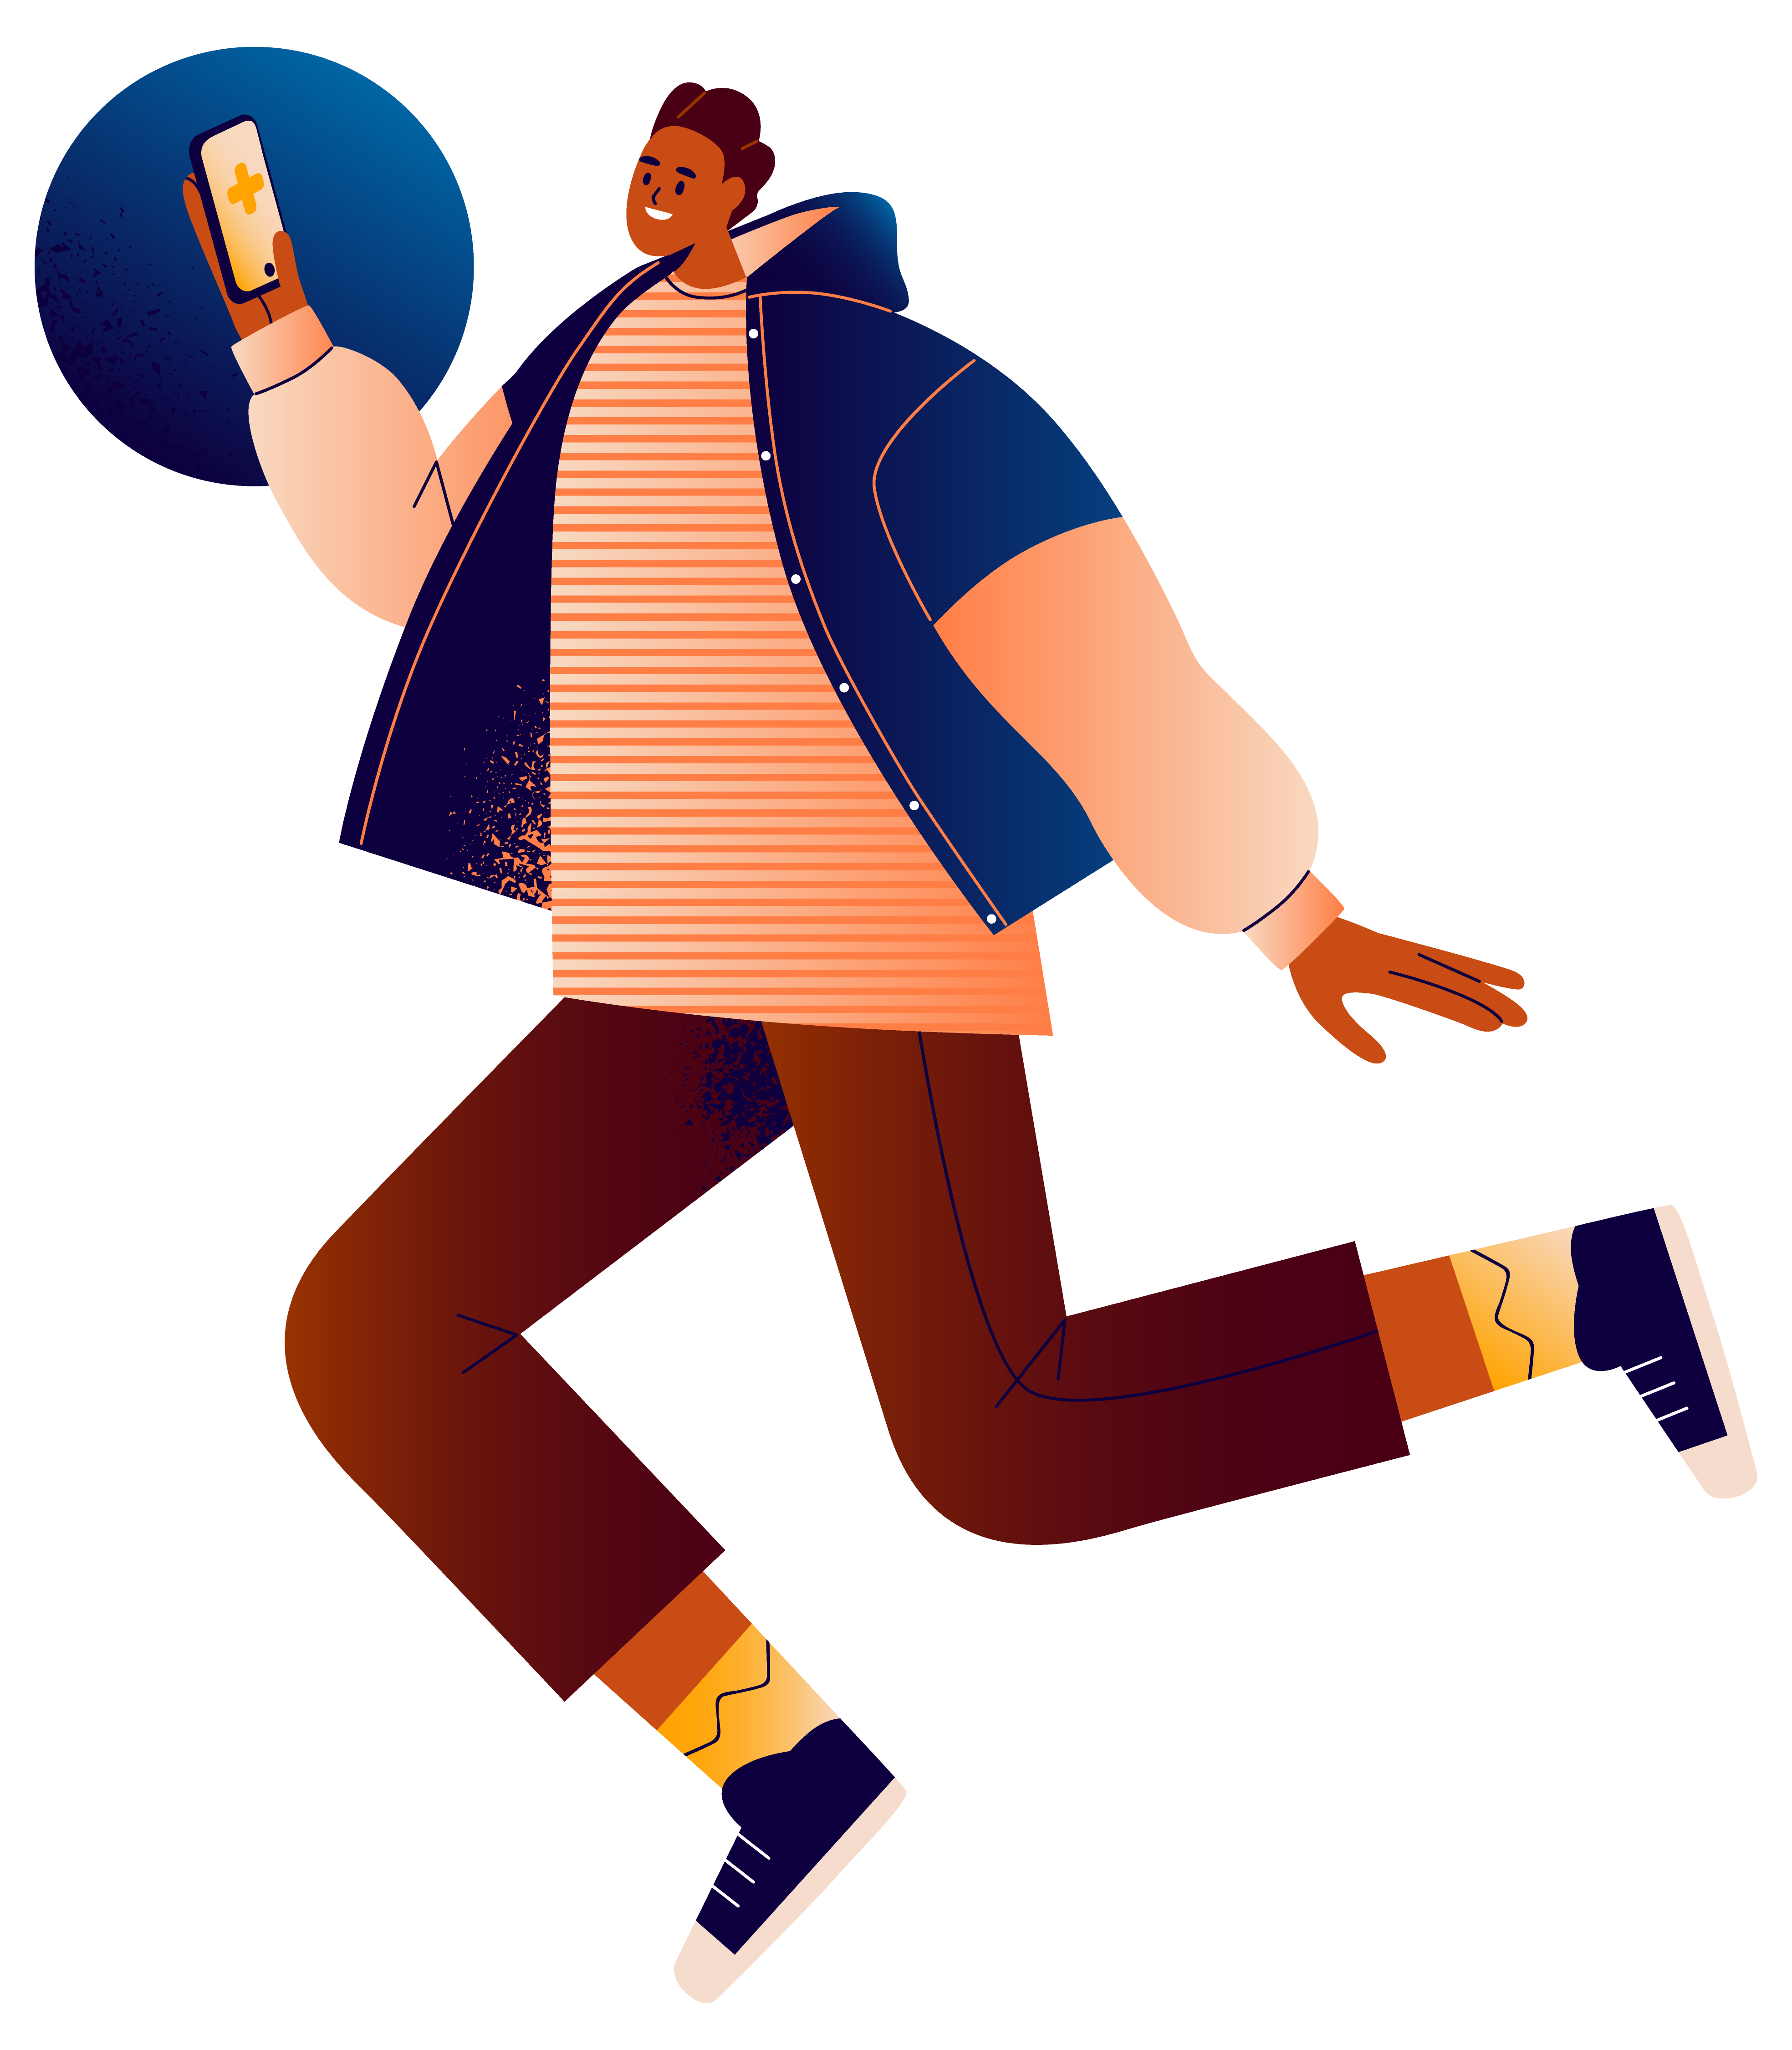 Stylized illustration of a person walking and looking at their mobile device